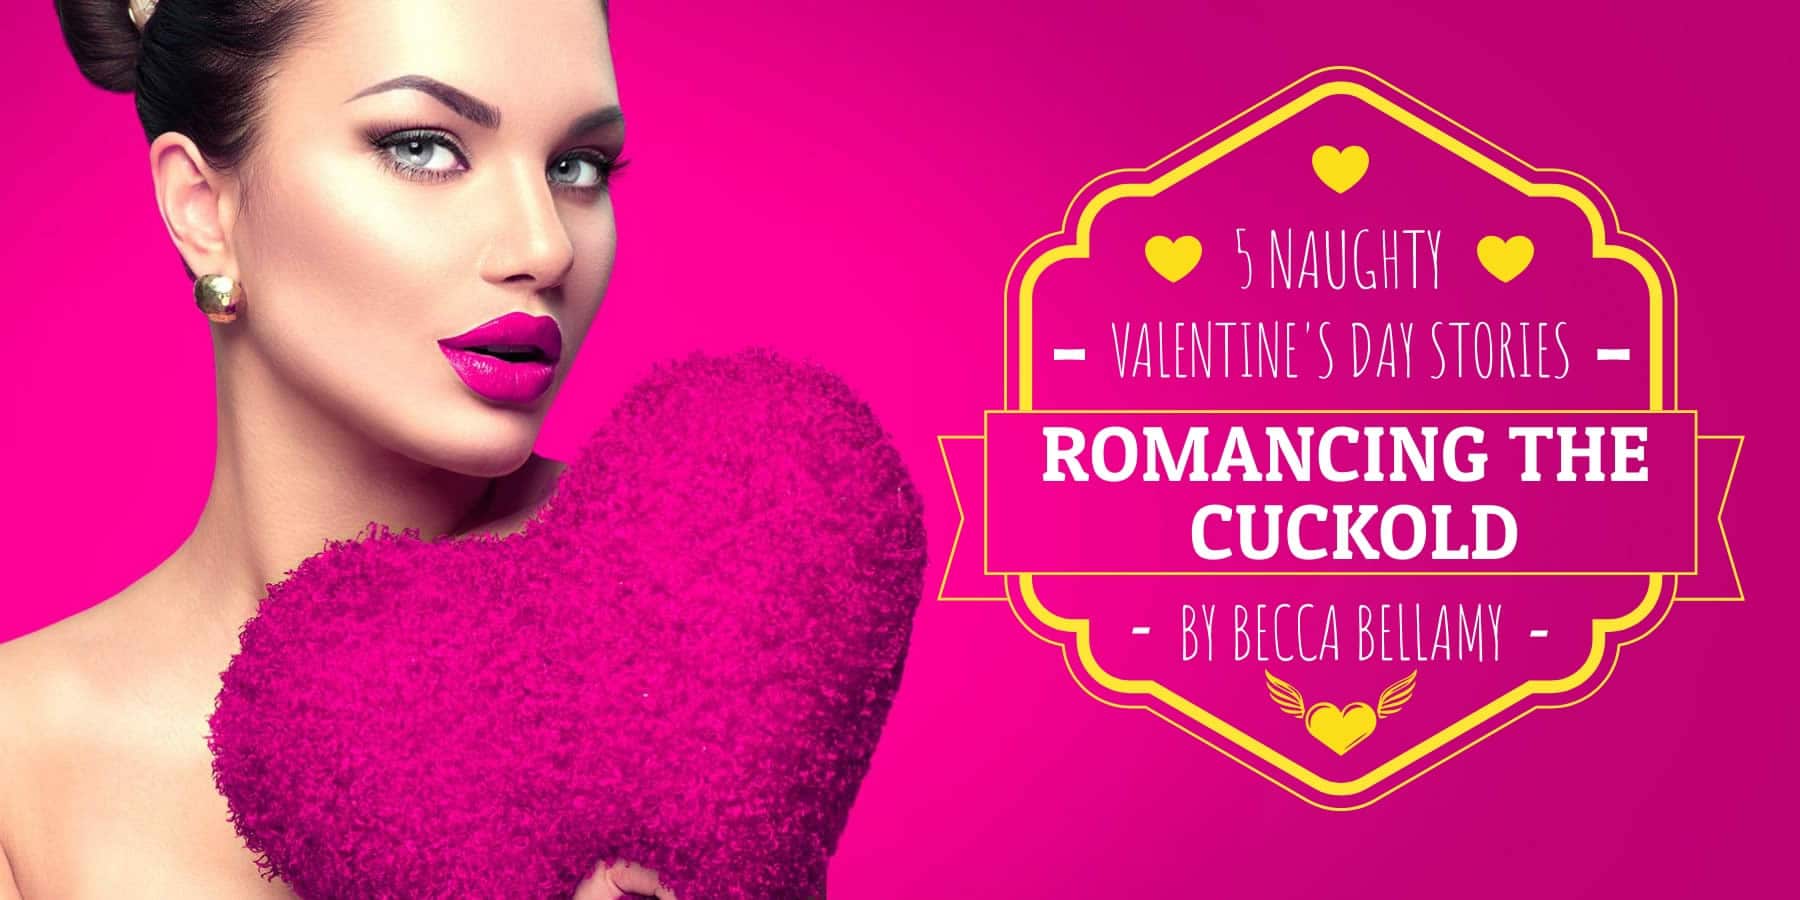 Romancing the Cuckold - Five Valentines Day Stories